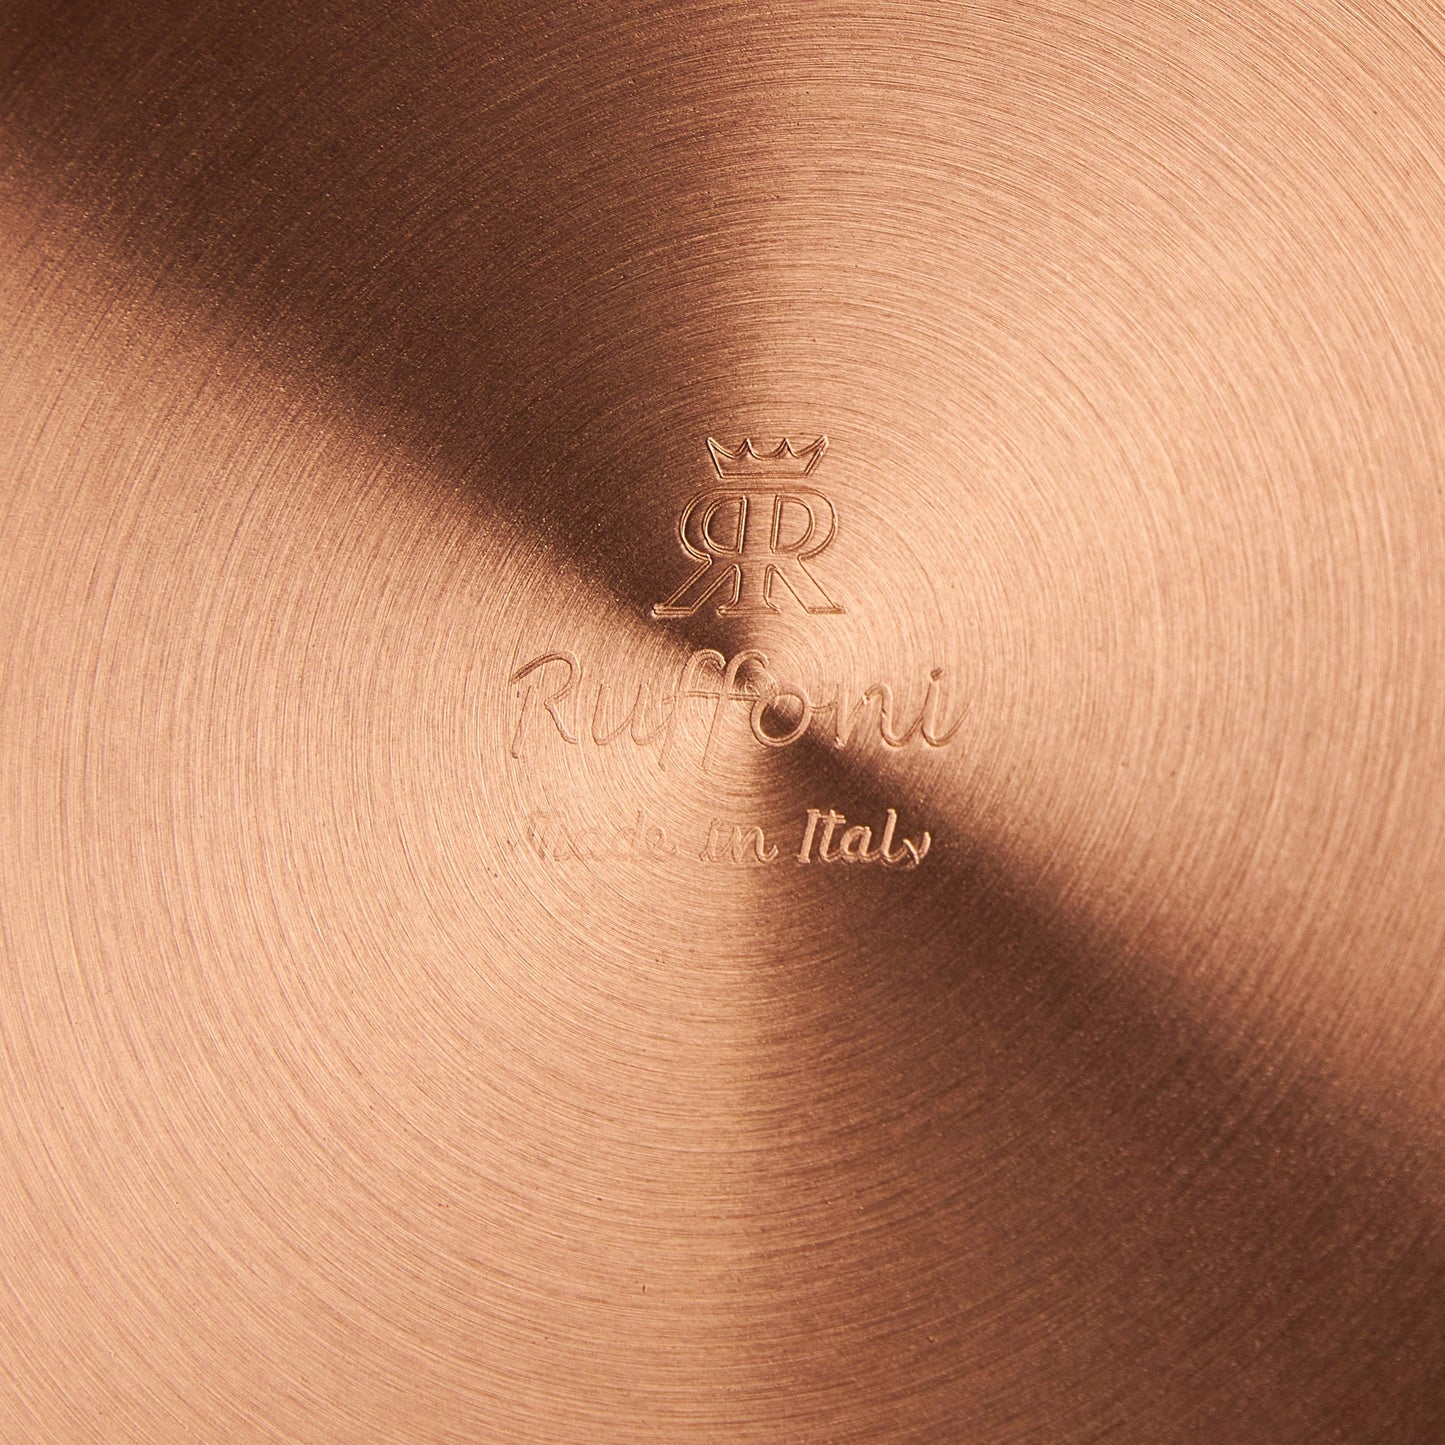 Ruffoni Made in Italy brand logo stamped under Historia hammered copper Oval Gratin  for authenticity